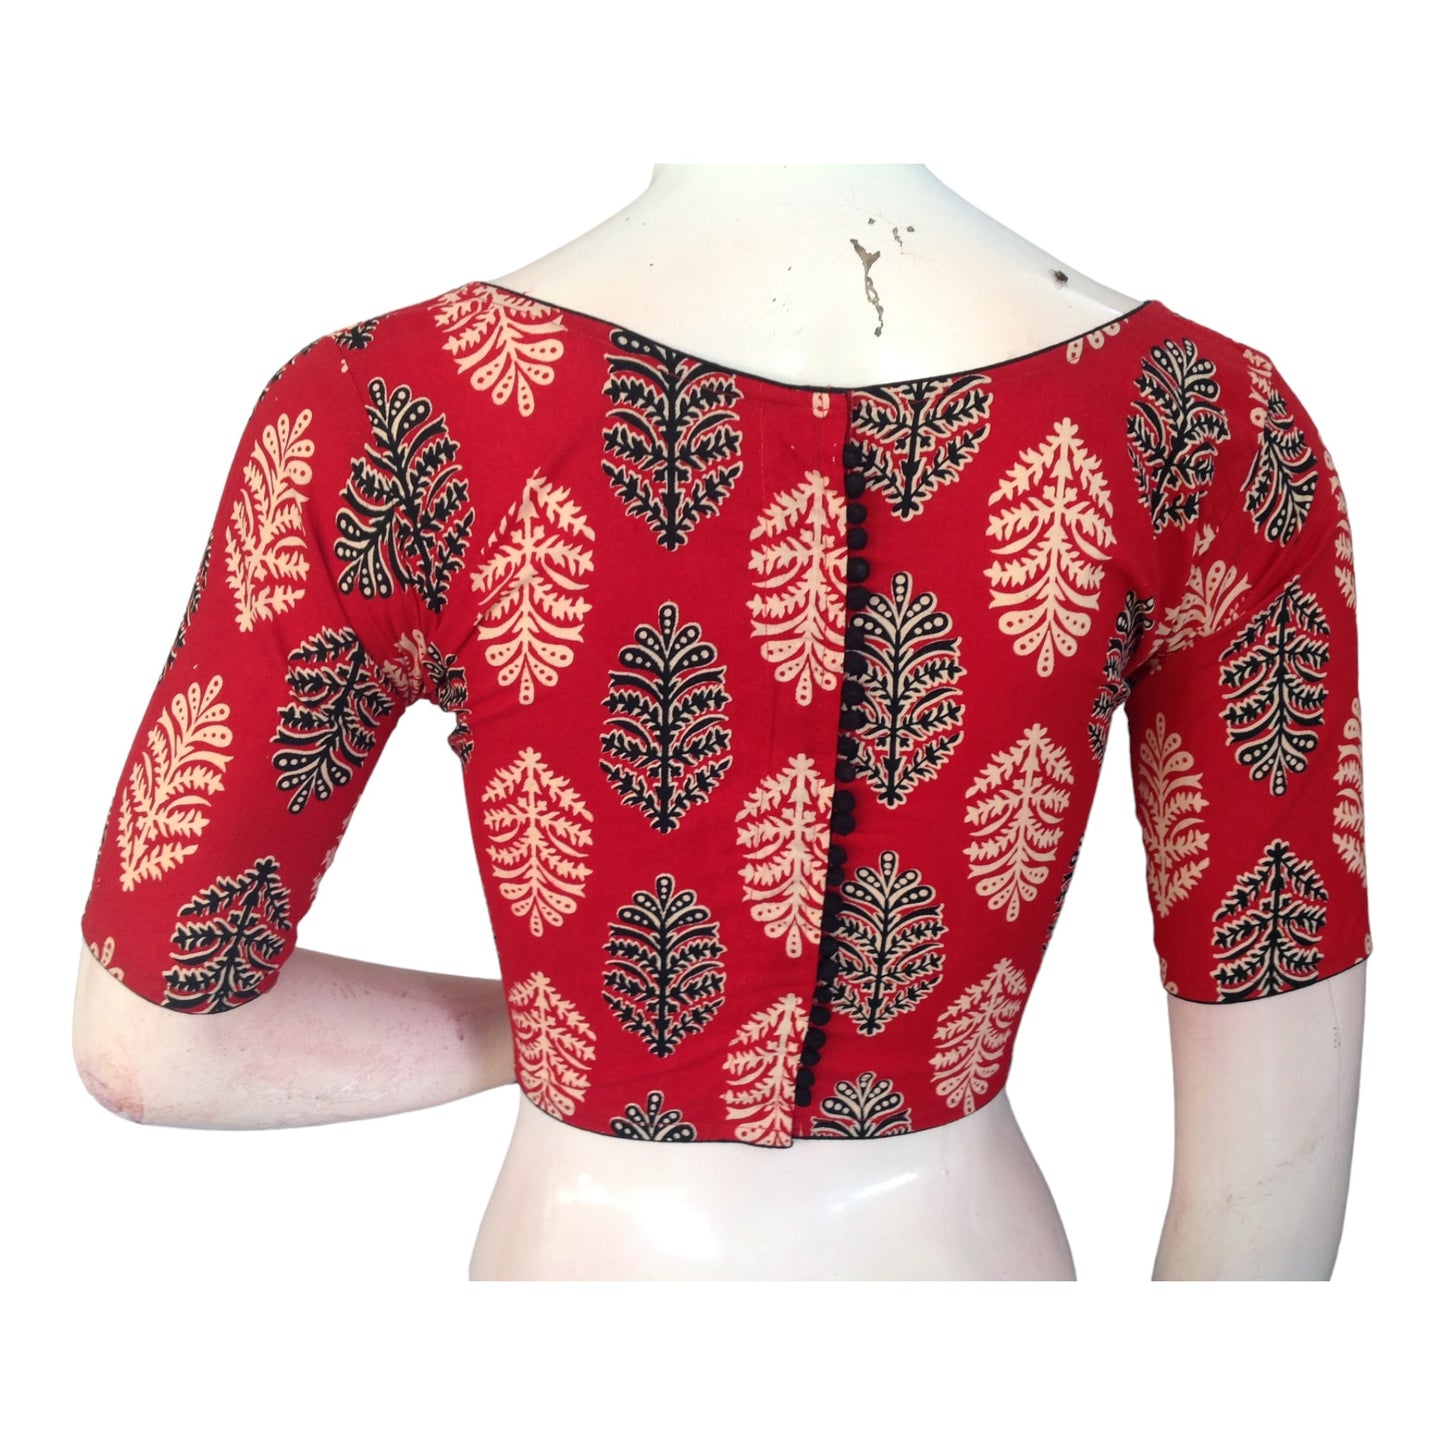 Vibrant Red High Neck Saree Blouse | Ready made | Exquisite Indian Craftsmanship